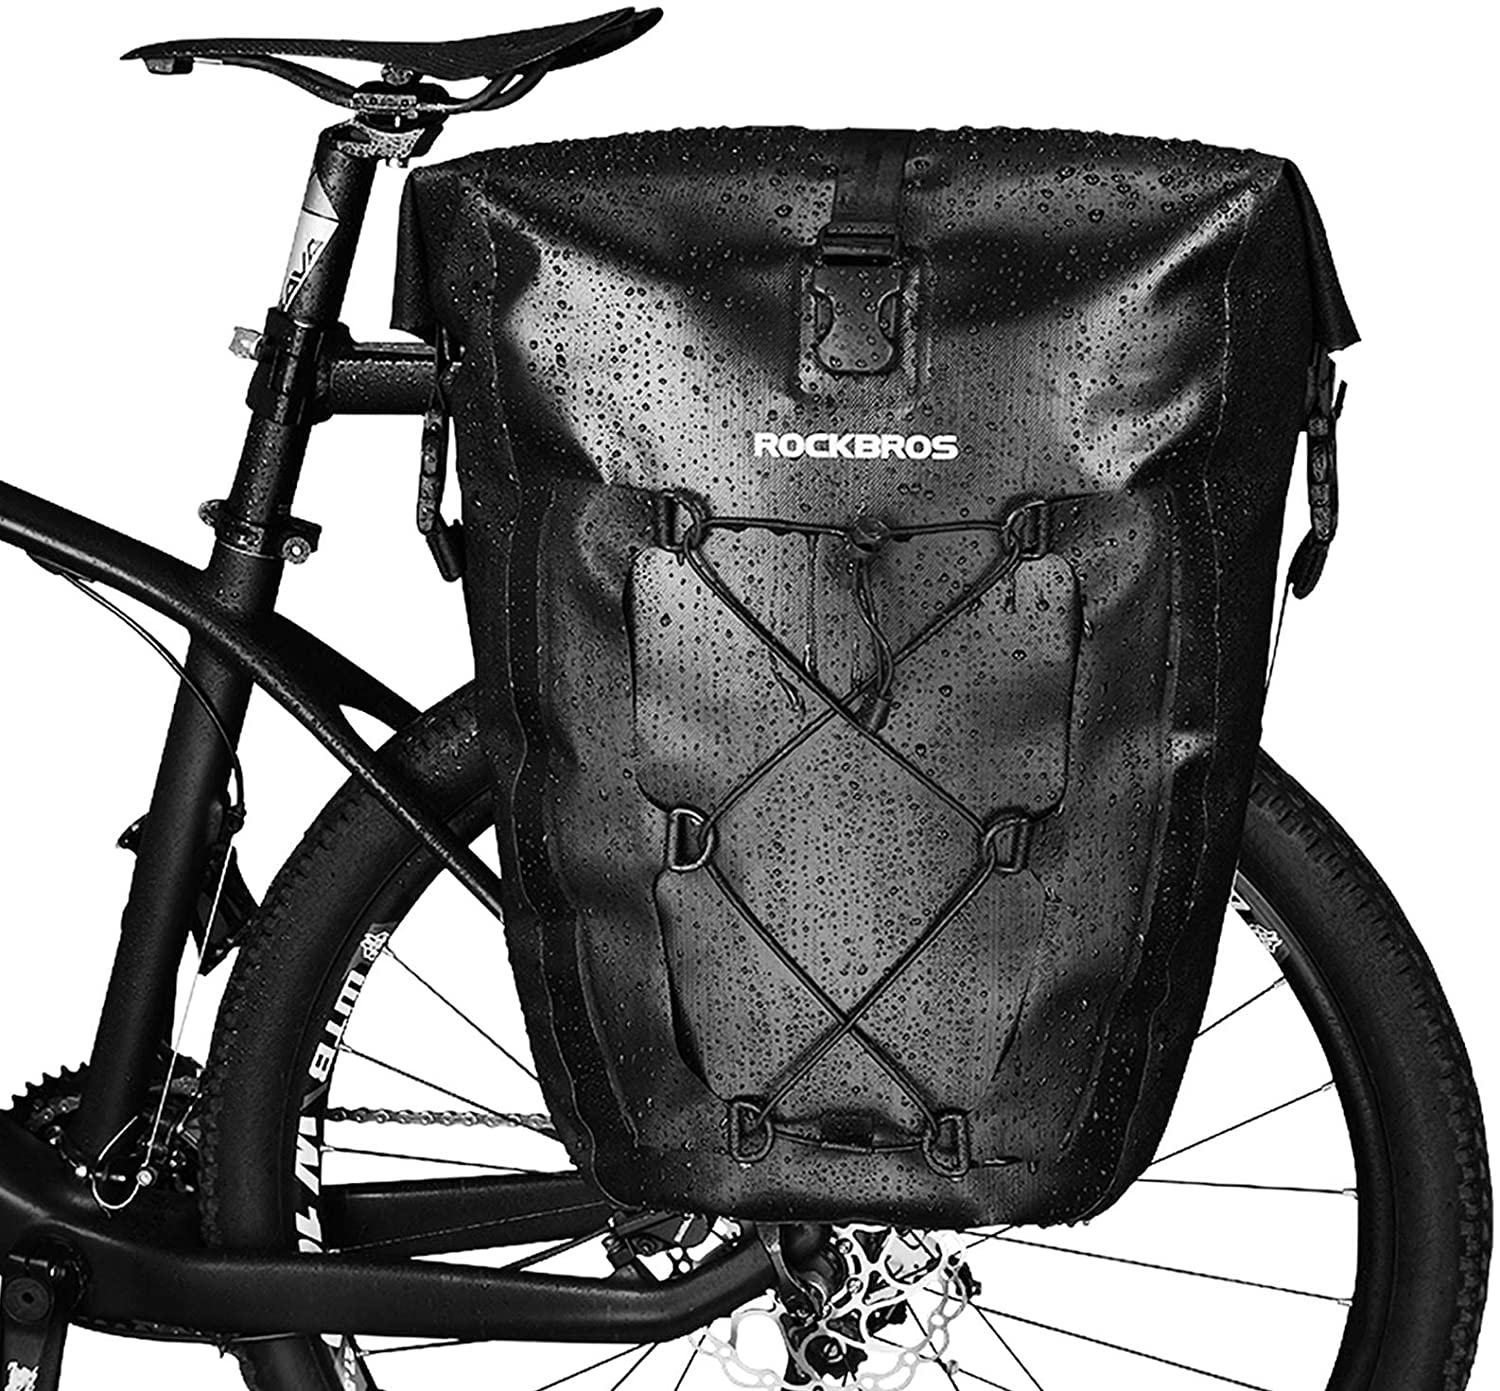 This mountain bike tool bag idea is suitable for any person needing to carry extra tools on their rides.